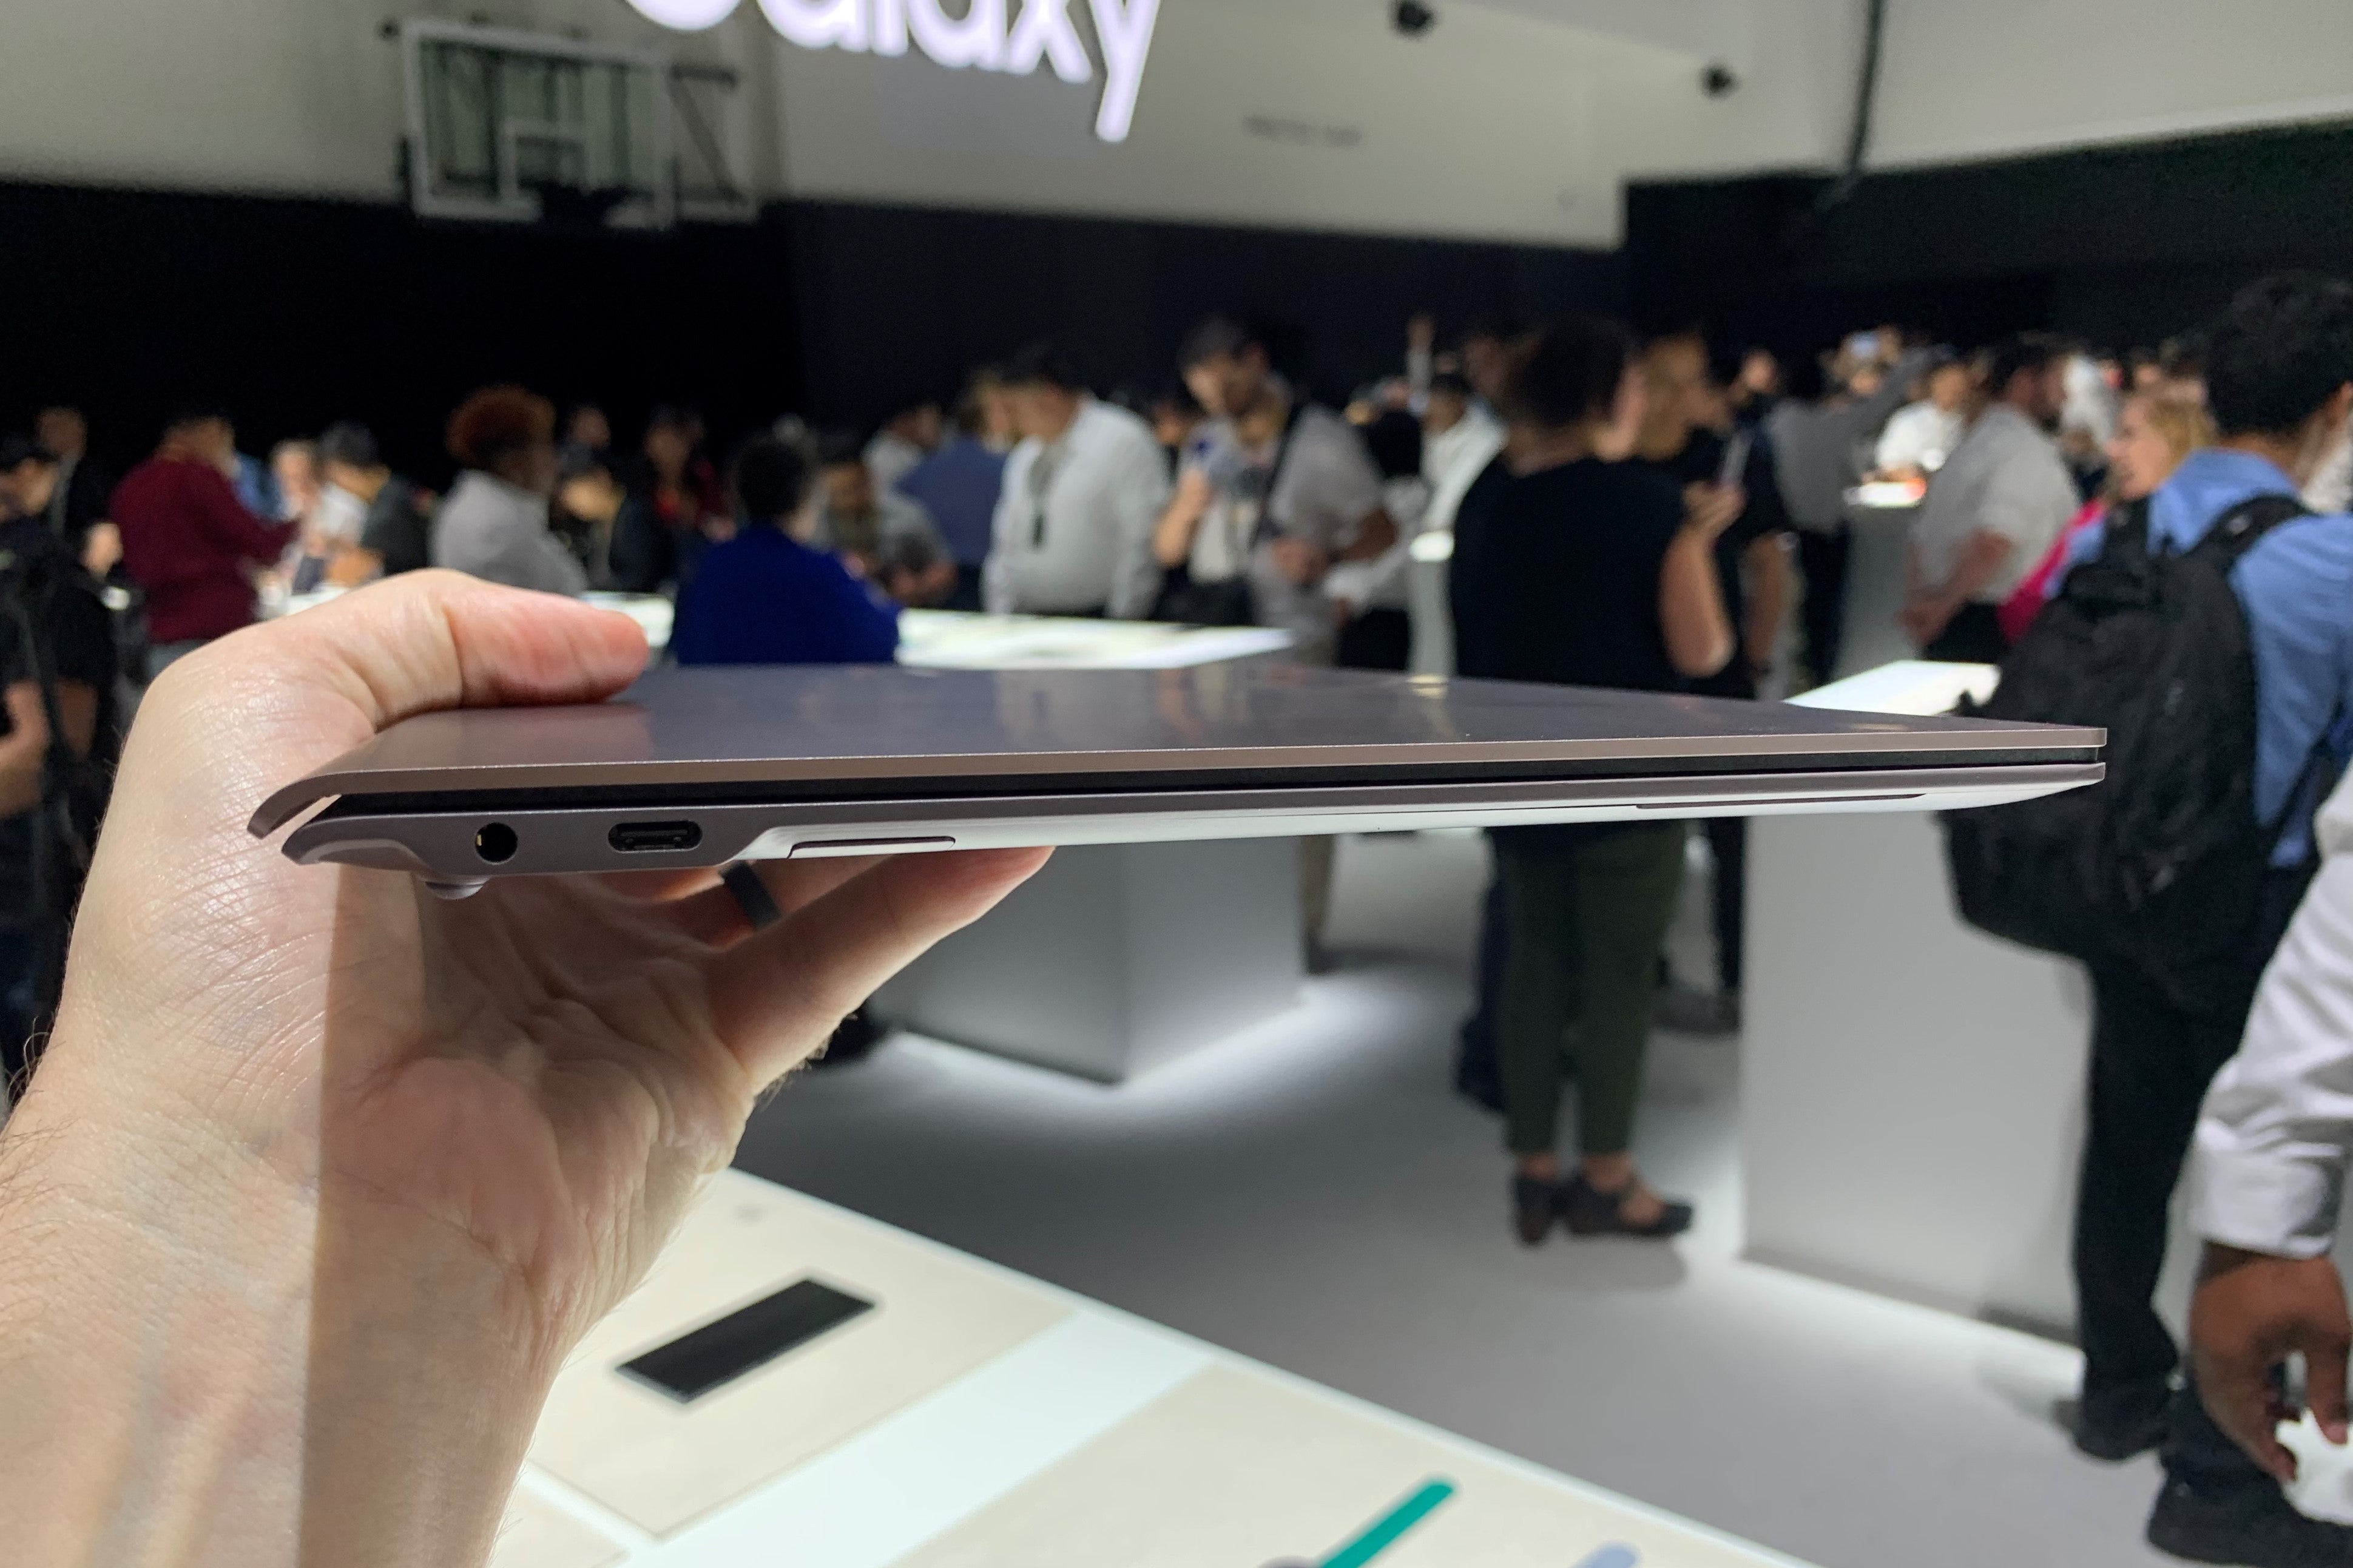 Hands-on: Samsung’s Galaxy Book S debuts with the Snapdragon 8cx - PC